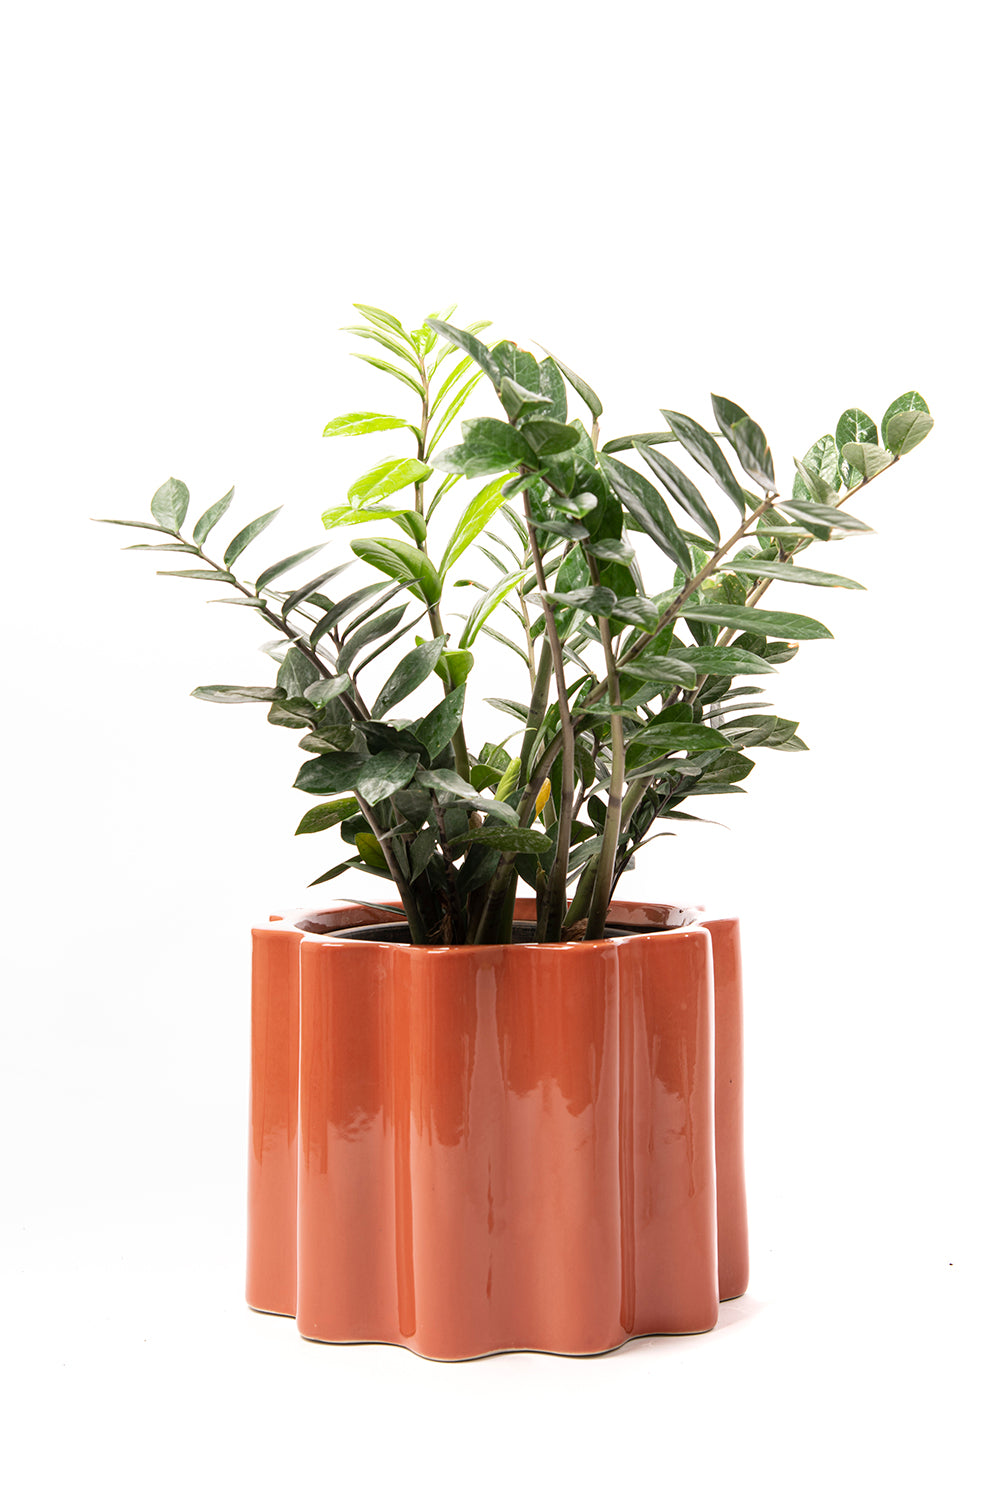 Large Size Balmy Waves Ceramic Pot in Coral Pink colour with a ZZ Plant